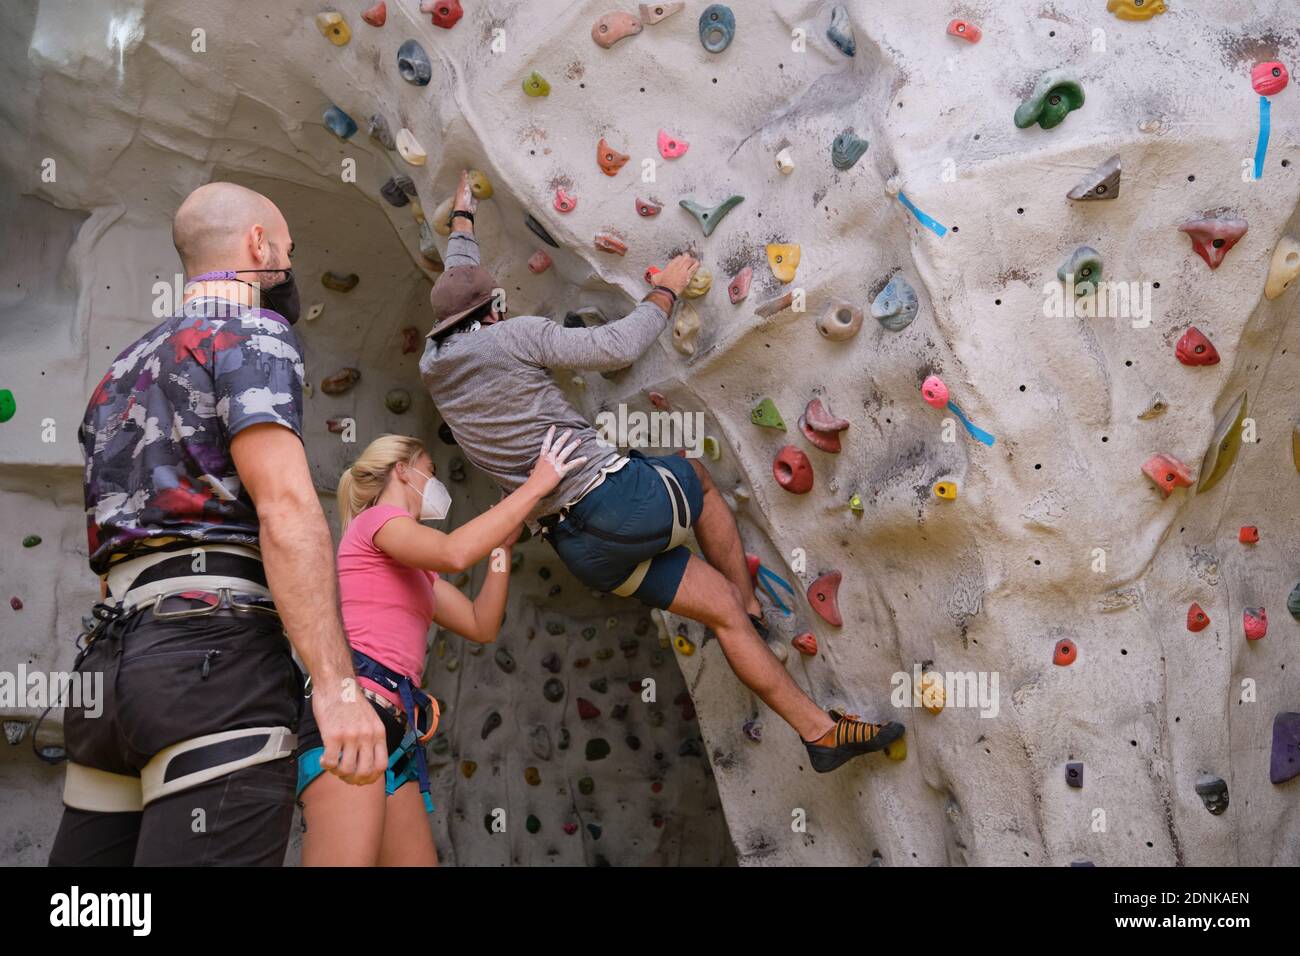 Group of three young friends wearing protective face masks climbing and helping each other on artificial rock climbing wall indoors. Extreme sports in Stock Photo